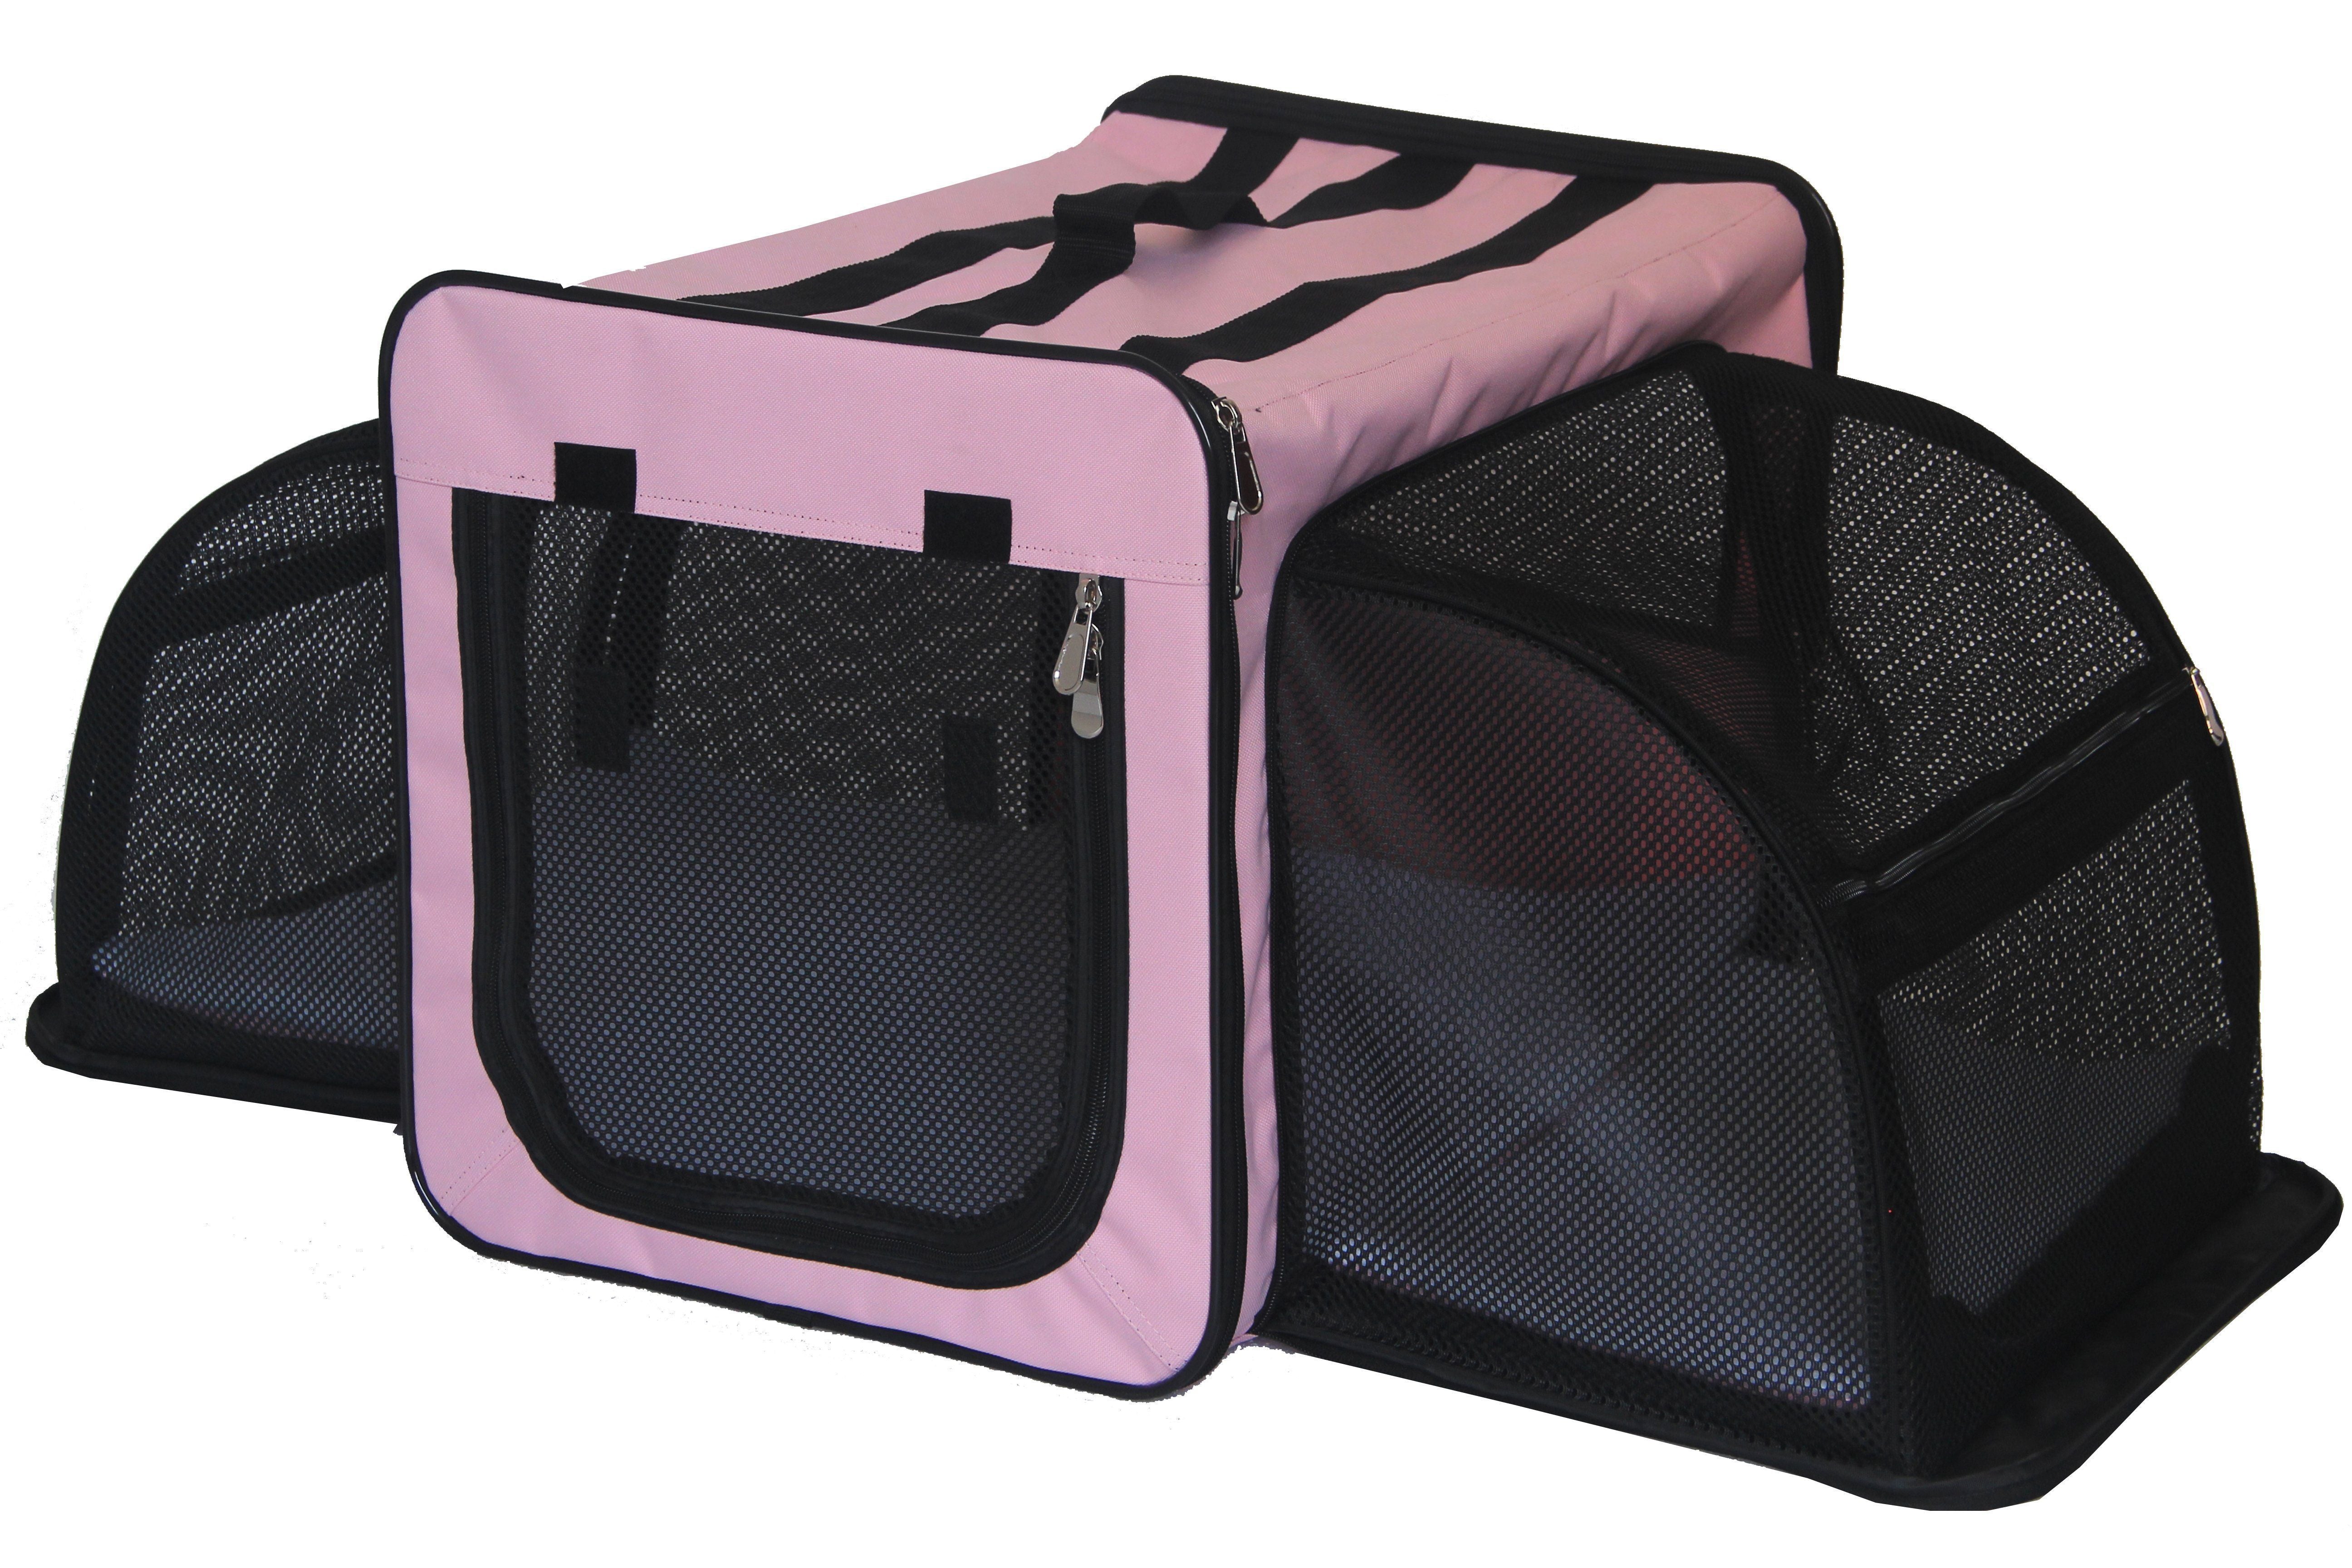 Pet Life ® 'Capacious' Dual-Sided Expandable Spacious Wire Folding Collapsible Lightweight Pet Dog Crate Carrier House X-Small Pink